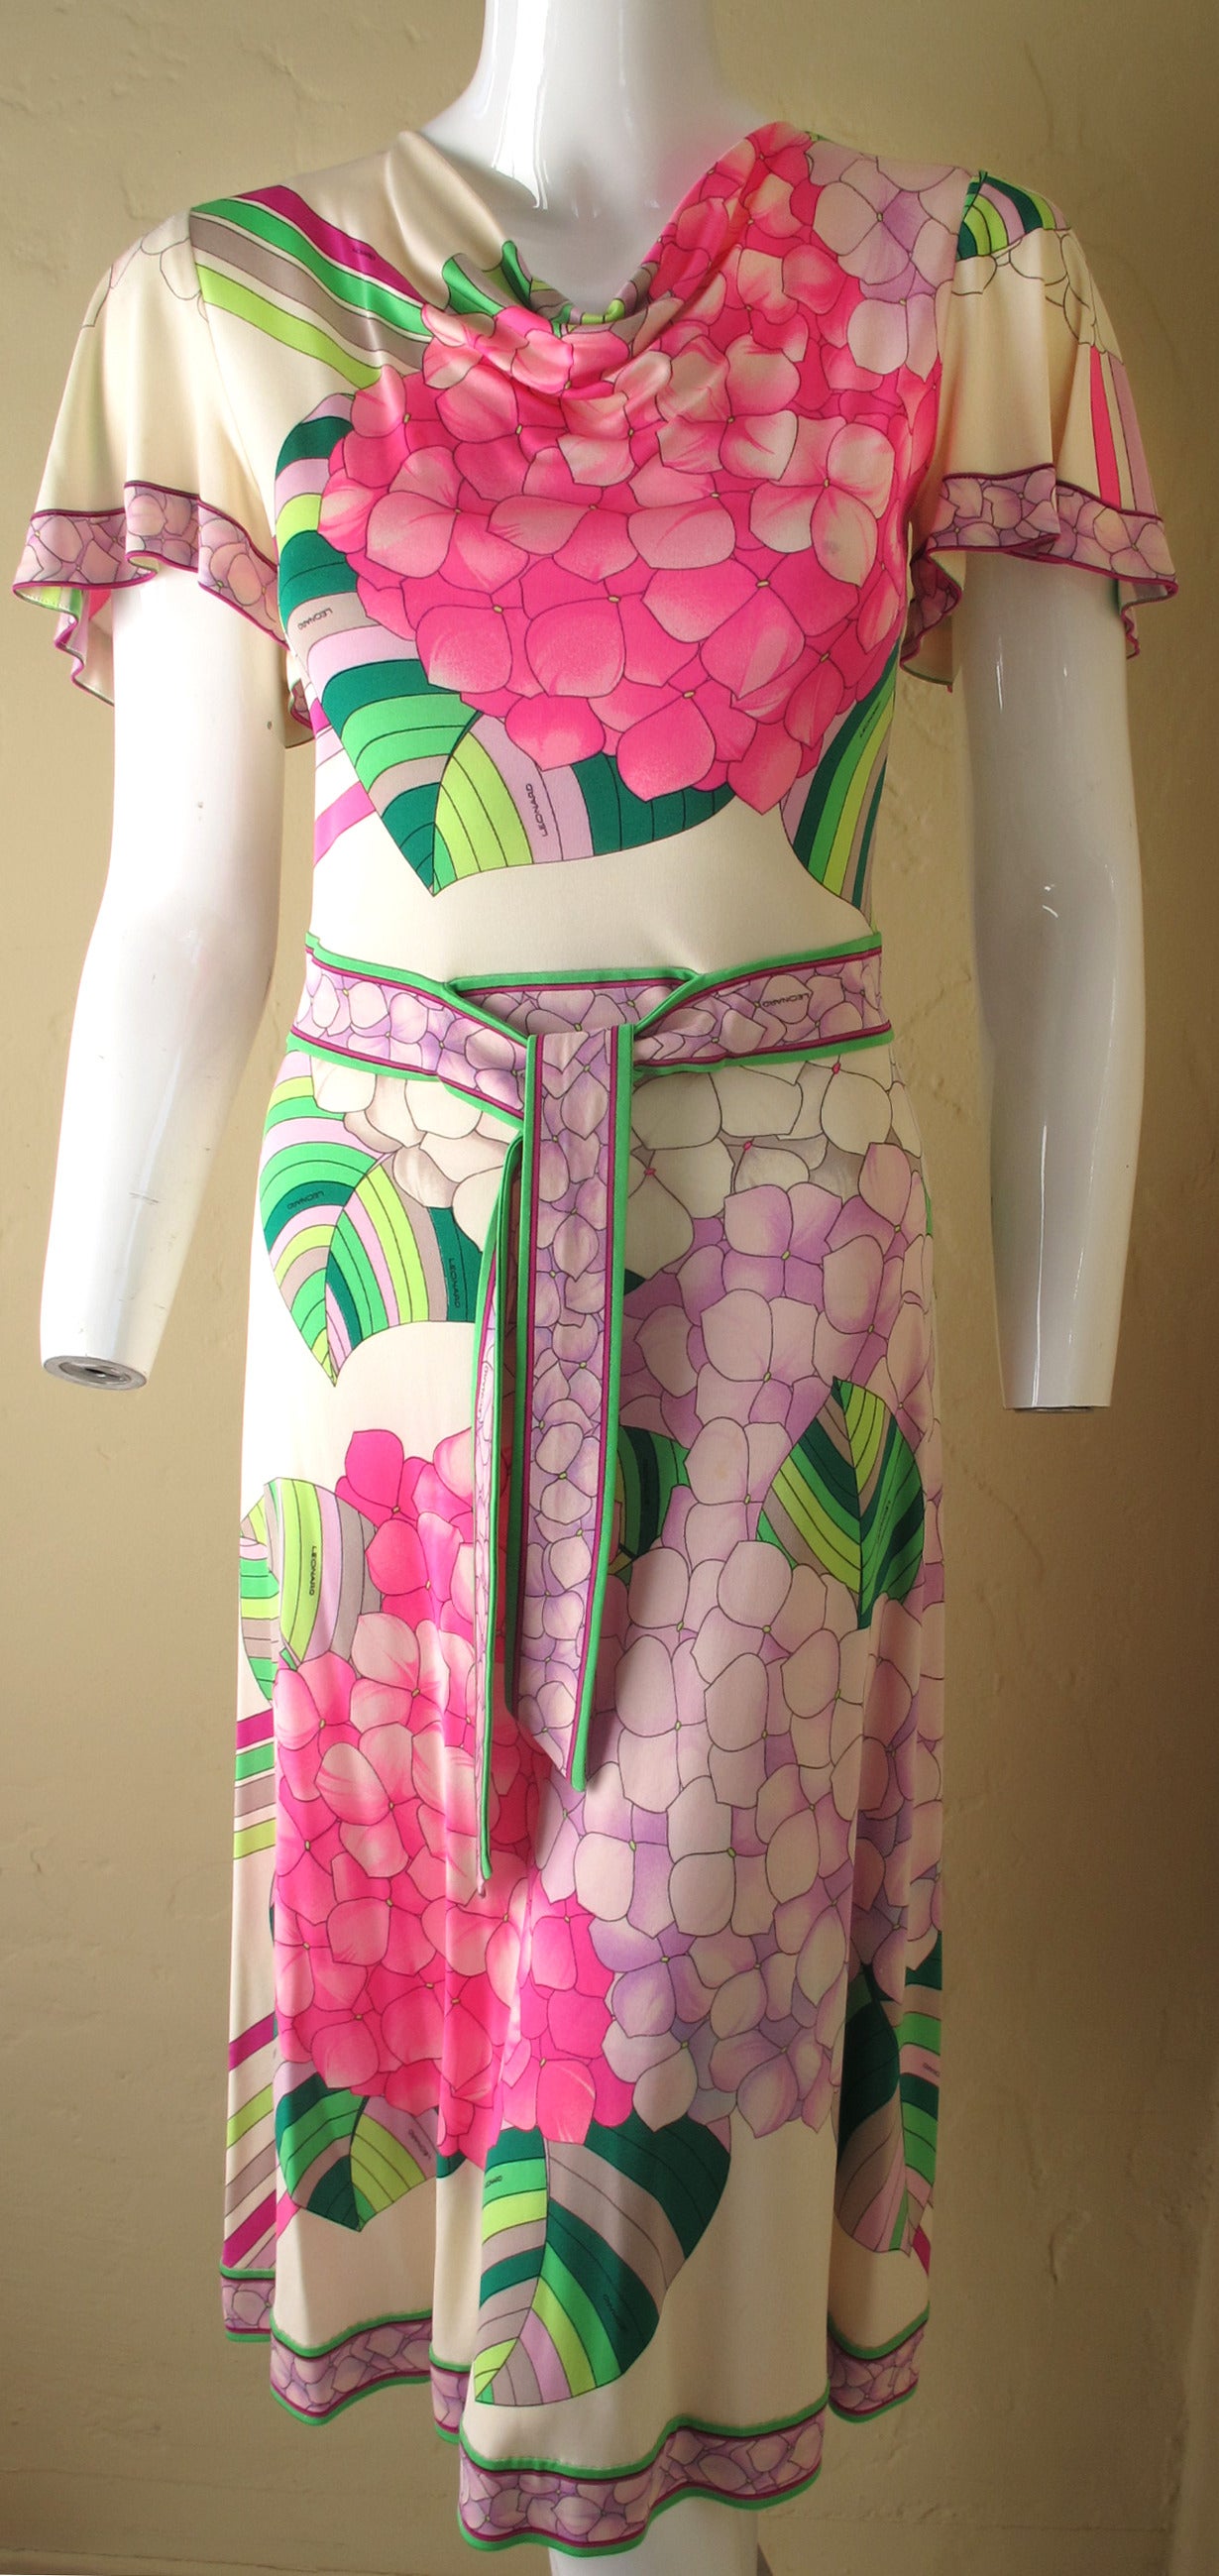 Unusual knee-length day dress by Parisian designer, Leonard made from silk jersey. Dress features a cowl neckline, flutter sleeves, two frontal ties at the waste and a graphic floral print in various shades of pink, green, lilac, fuchsia, gray and